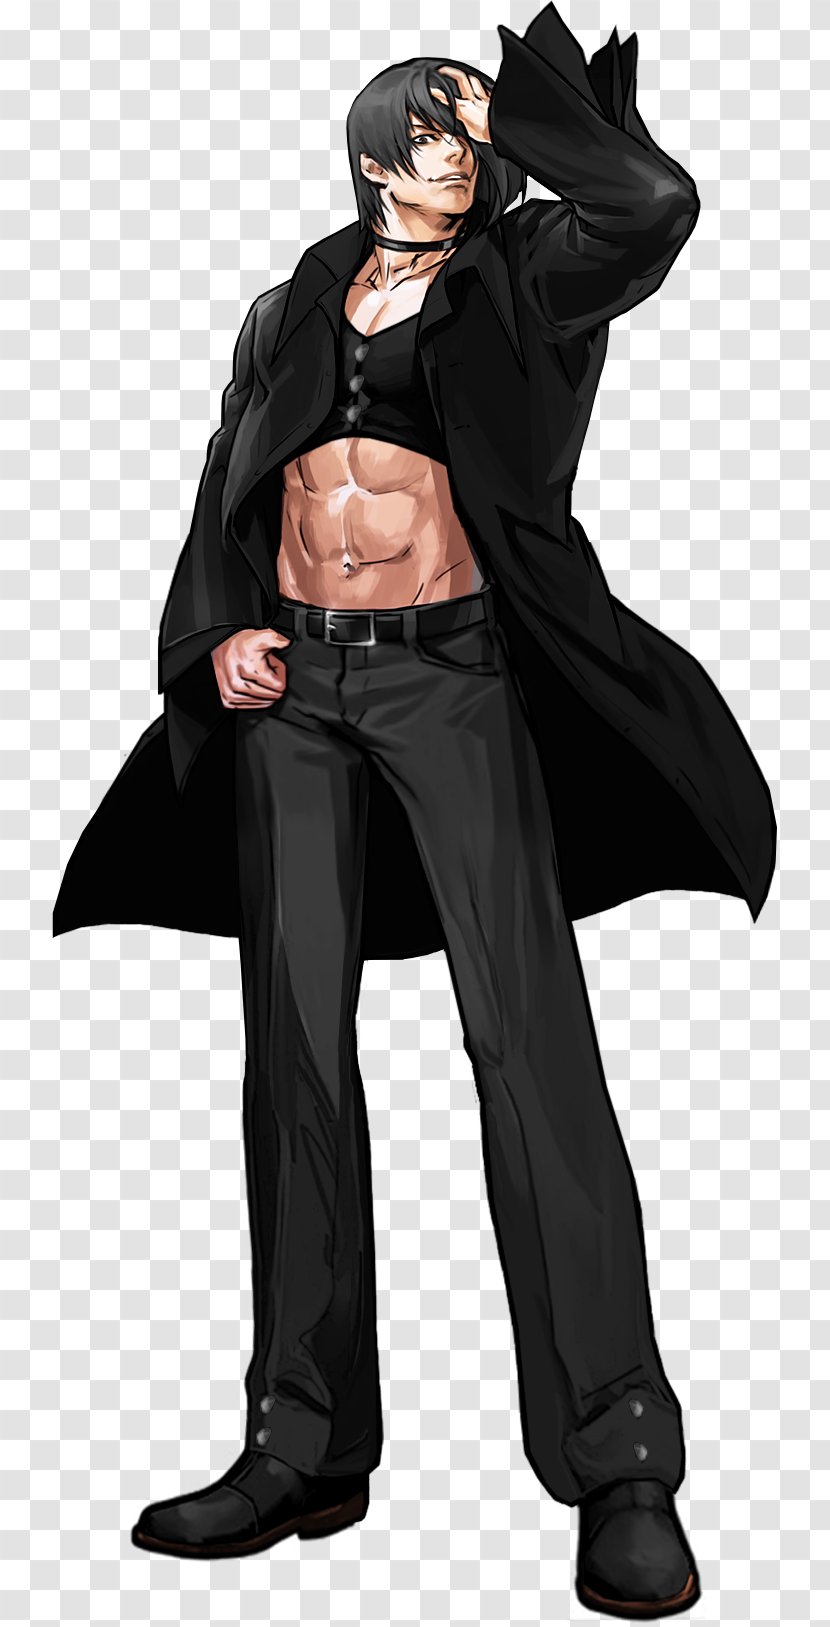 The King Of Fighters XIII Iori Yagami M.U.G.E.N '98 Transparent PNG